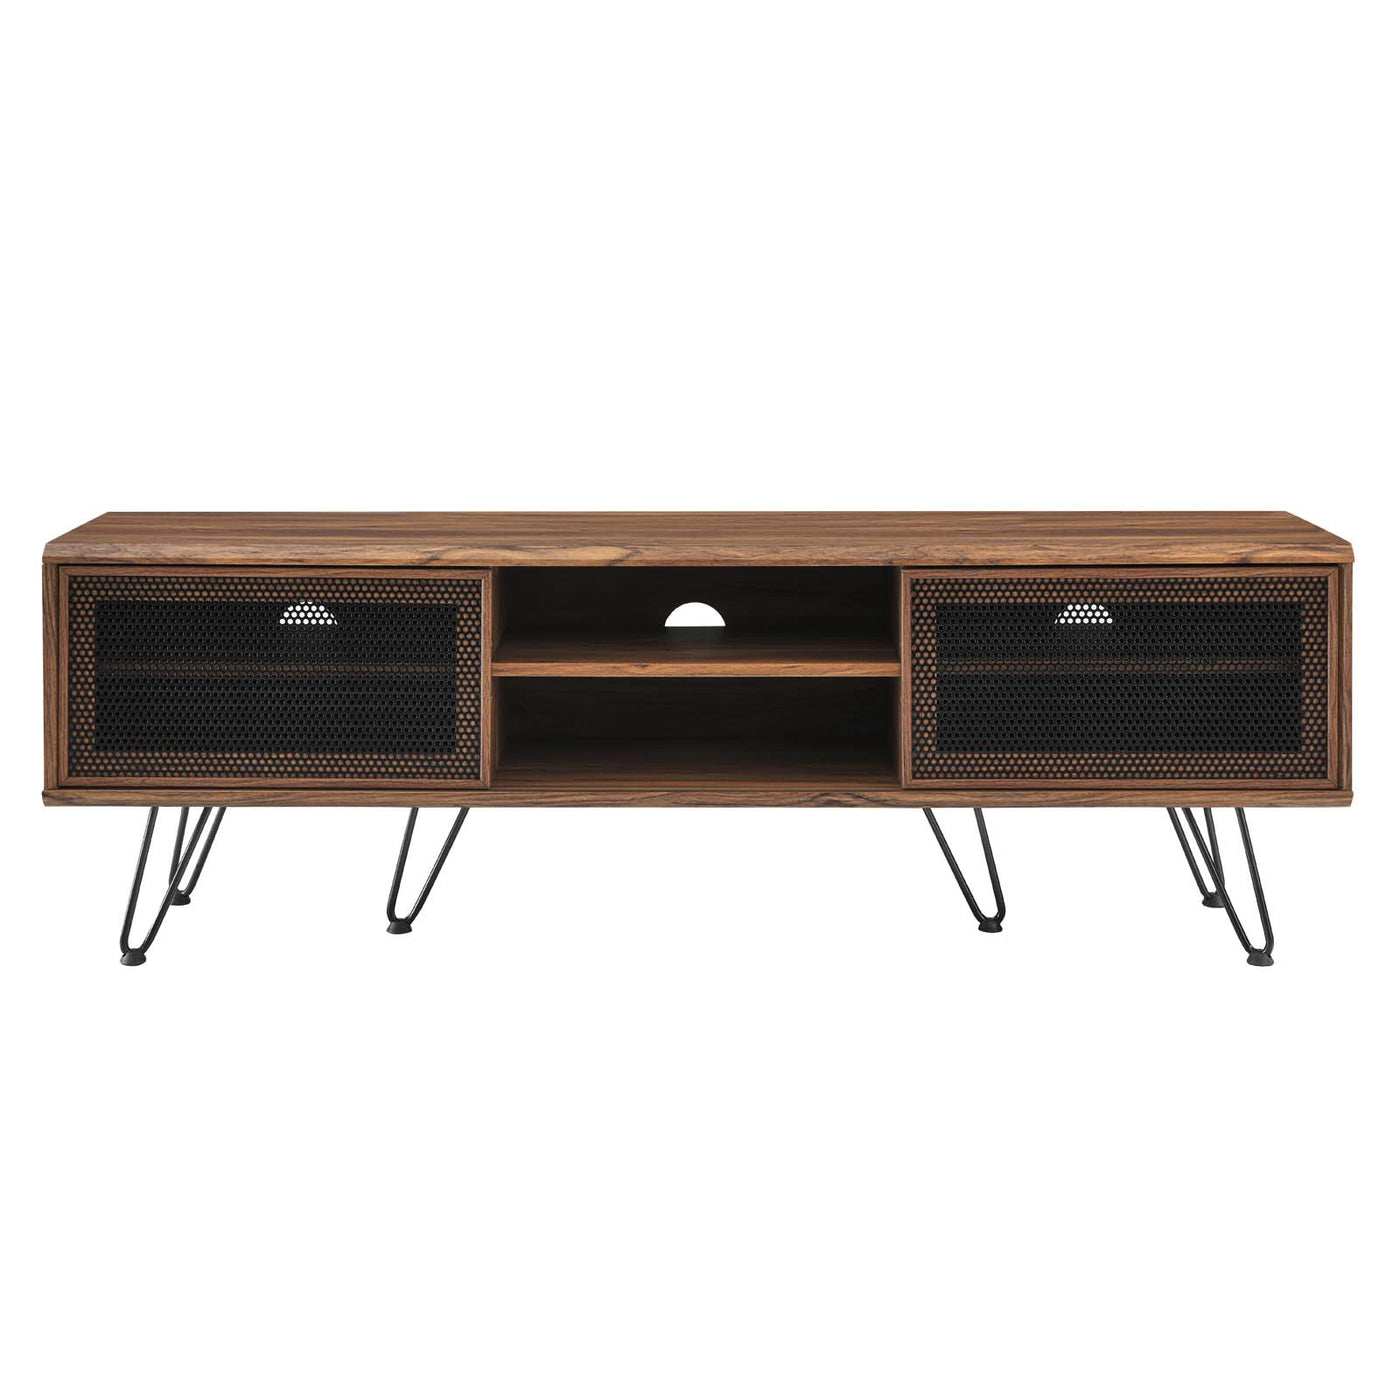 Nomad 59" TV Stand